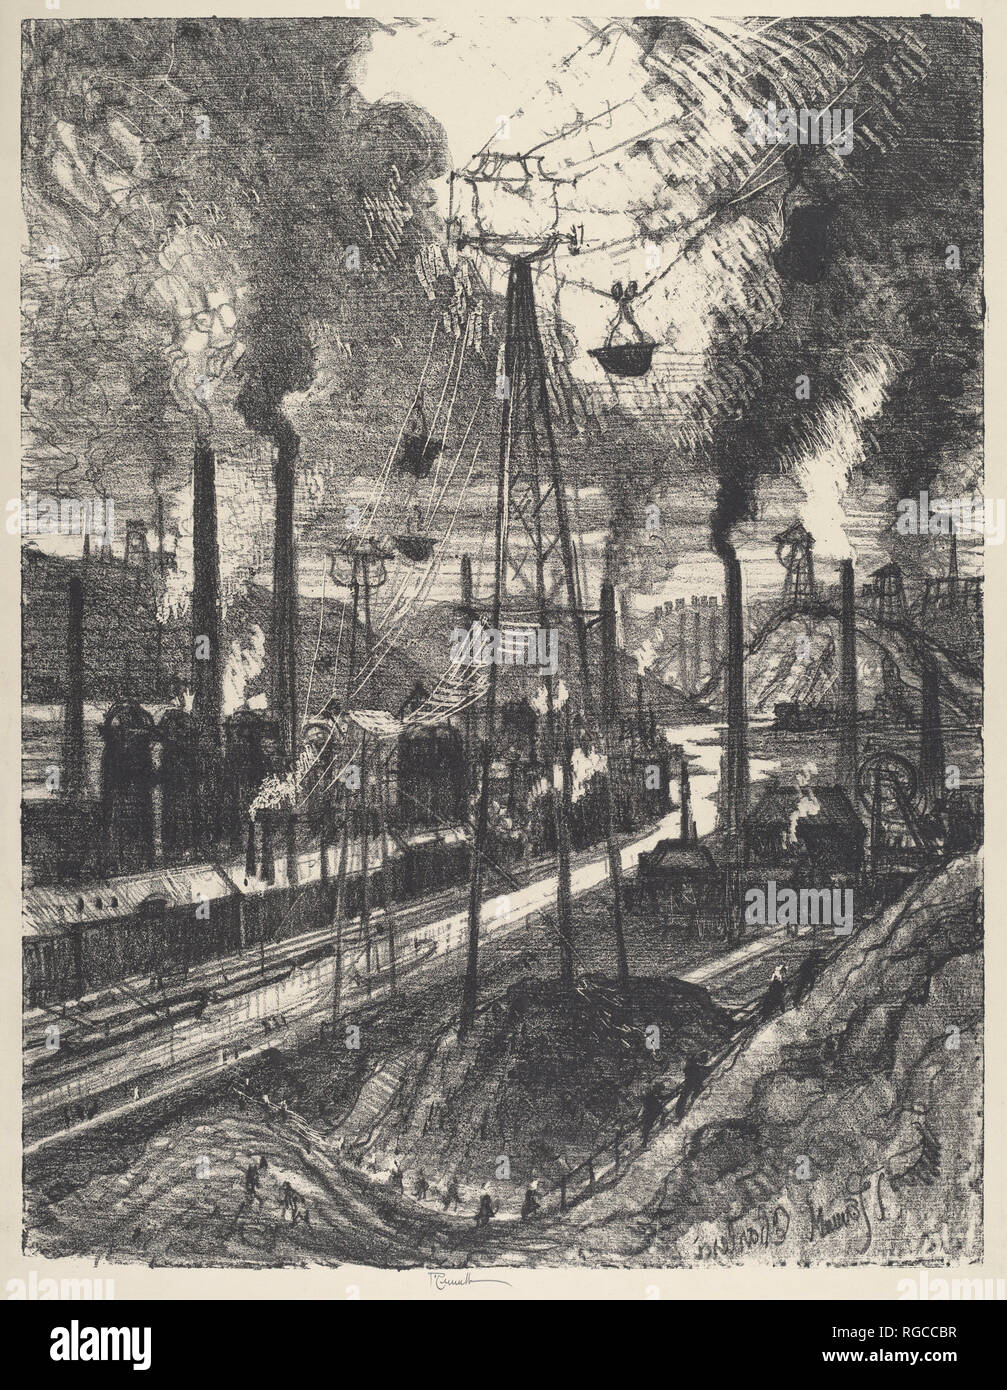 The Travellers, Charleroi. Dated: 1911. Medium: lithograph. Museum: National Gallery of Art, Washington DC. Author: Joseph Pennell. Stock Photo